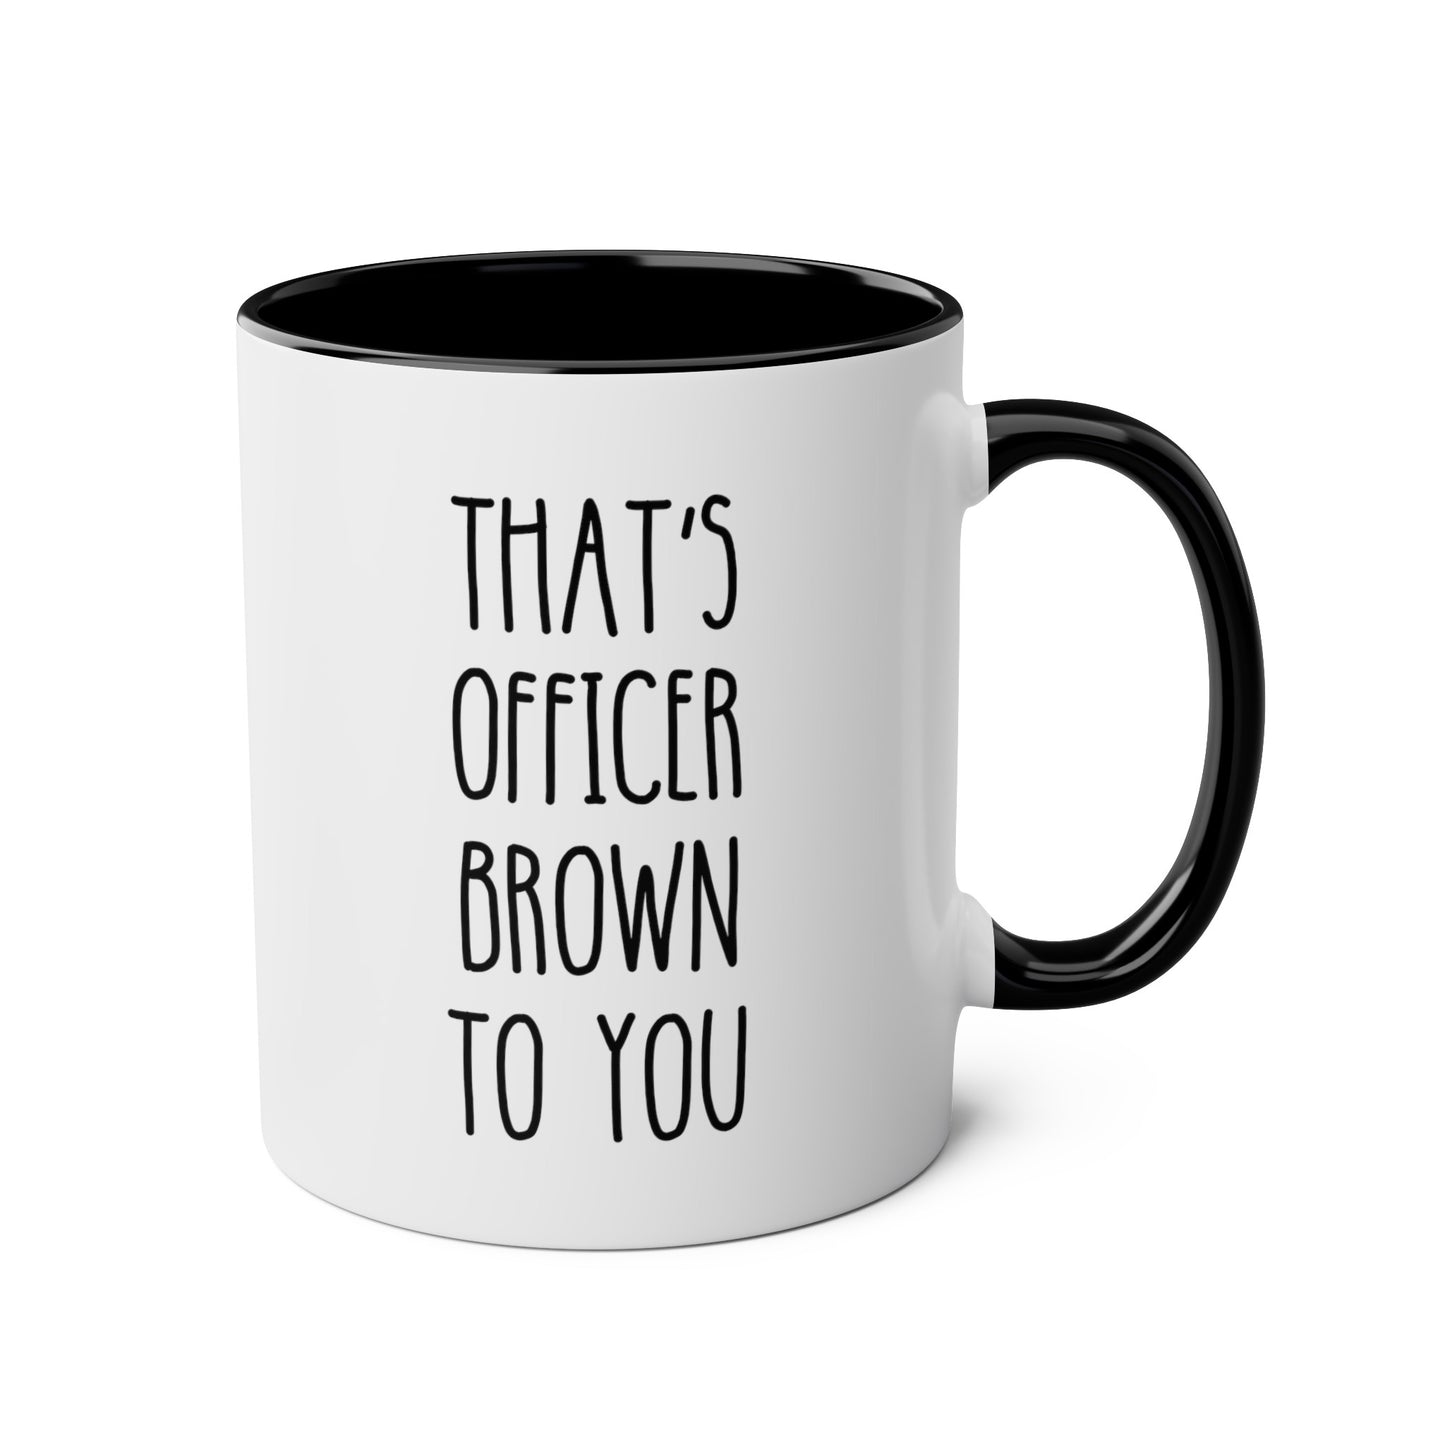 That's Officer To You 11oz white with black accent funny large coffee mug gift for cop police sergeant custom name appreciation personalize policeman promotion waveywares wavey wares wavywares wavy wares